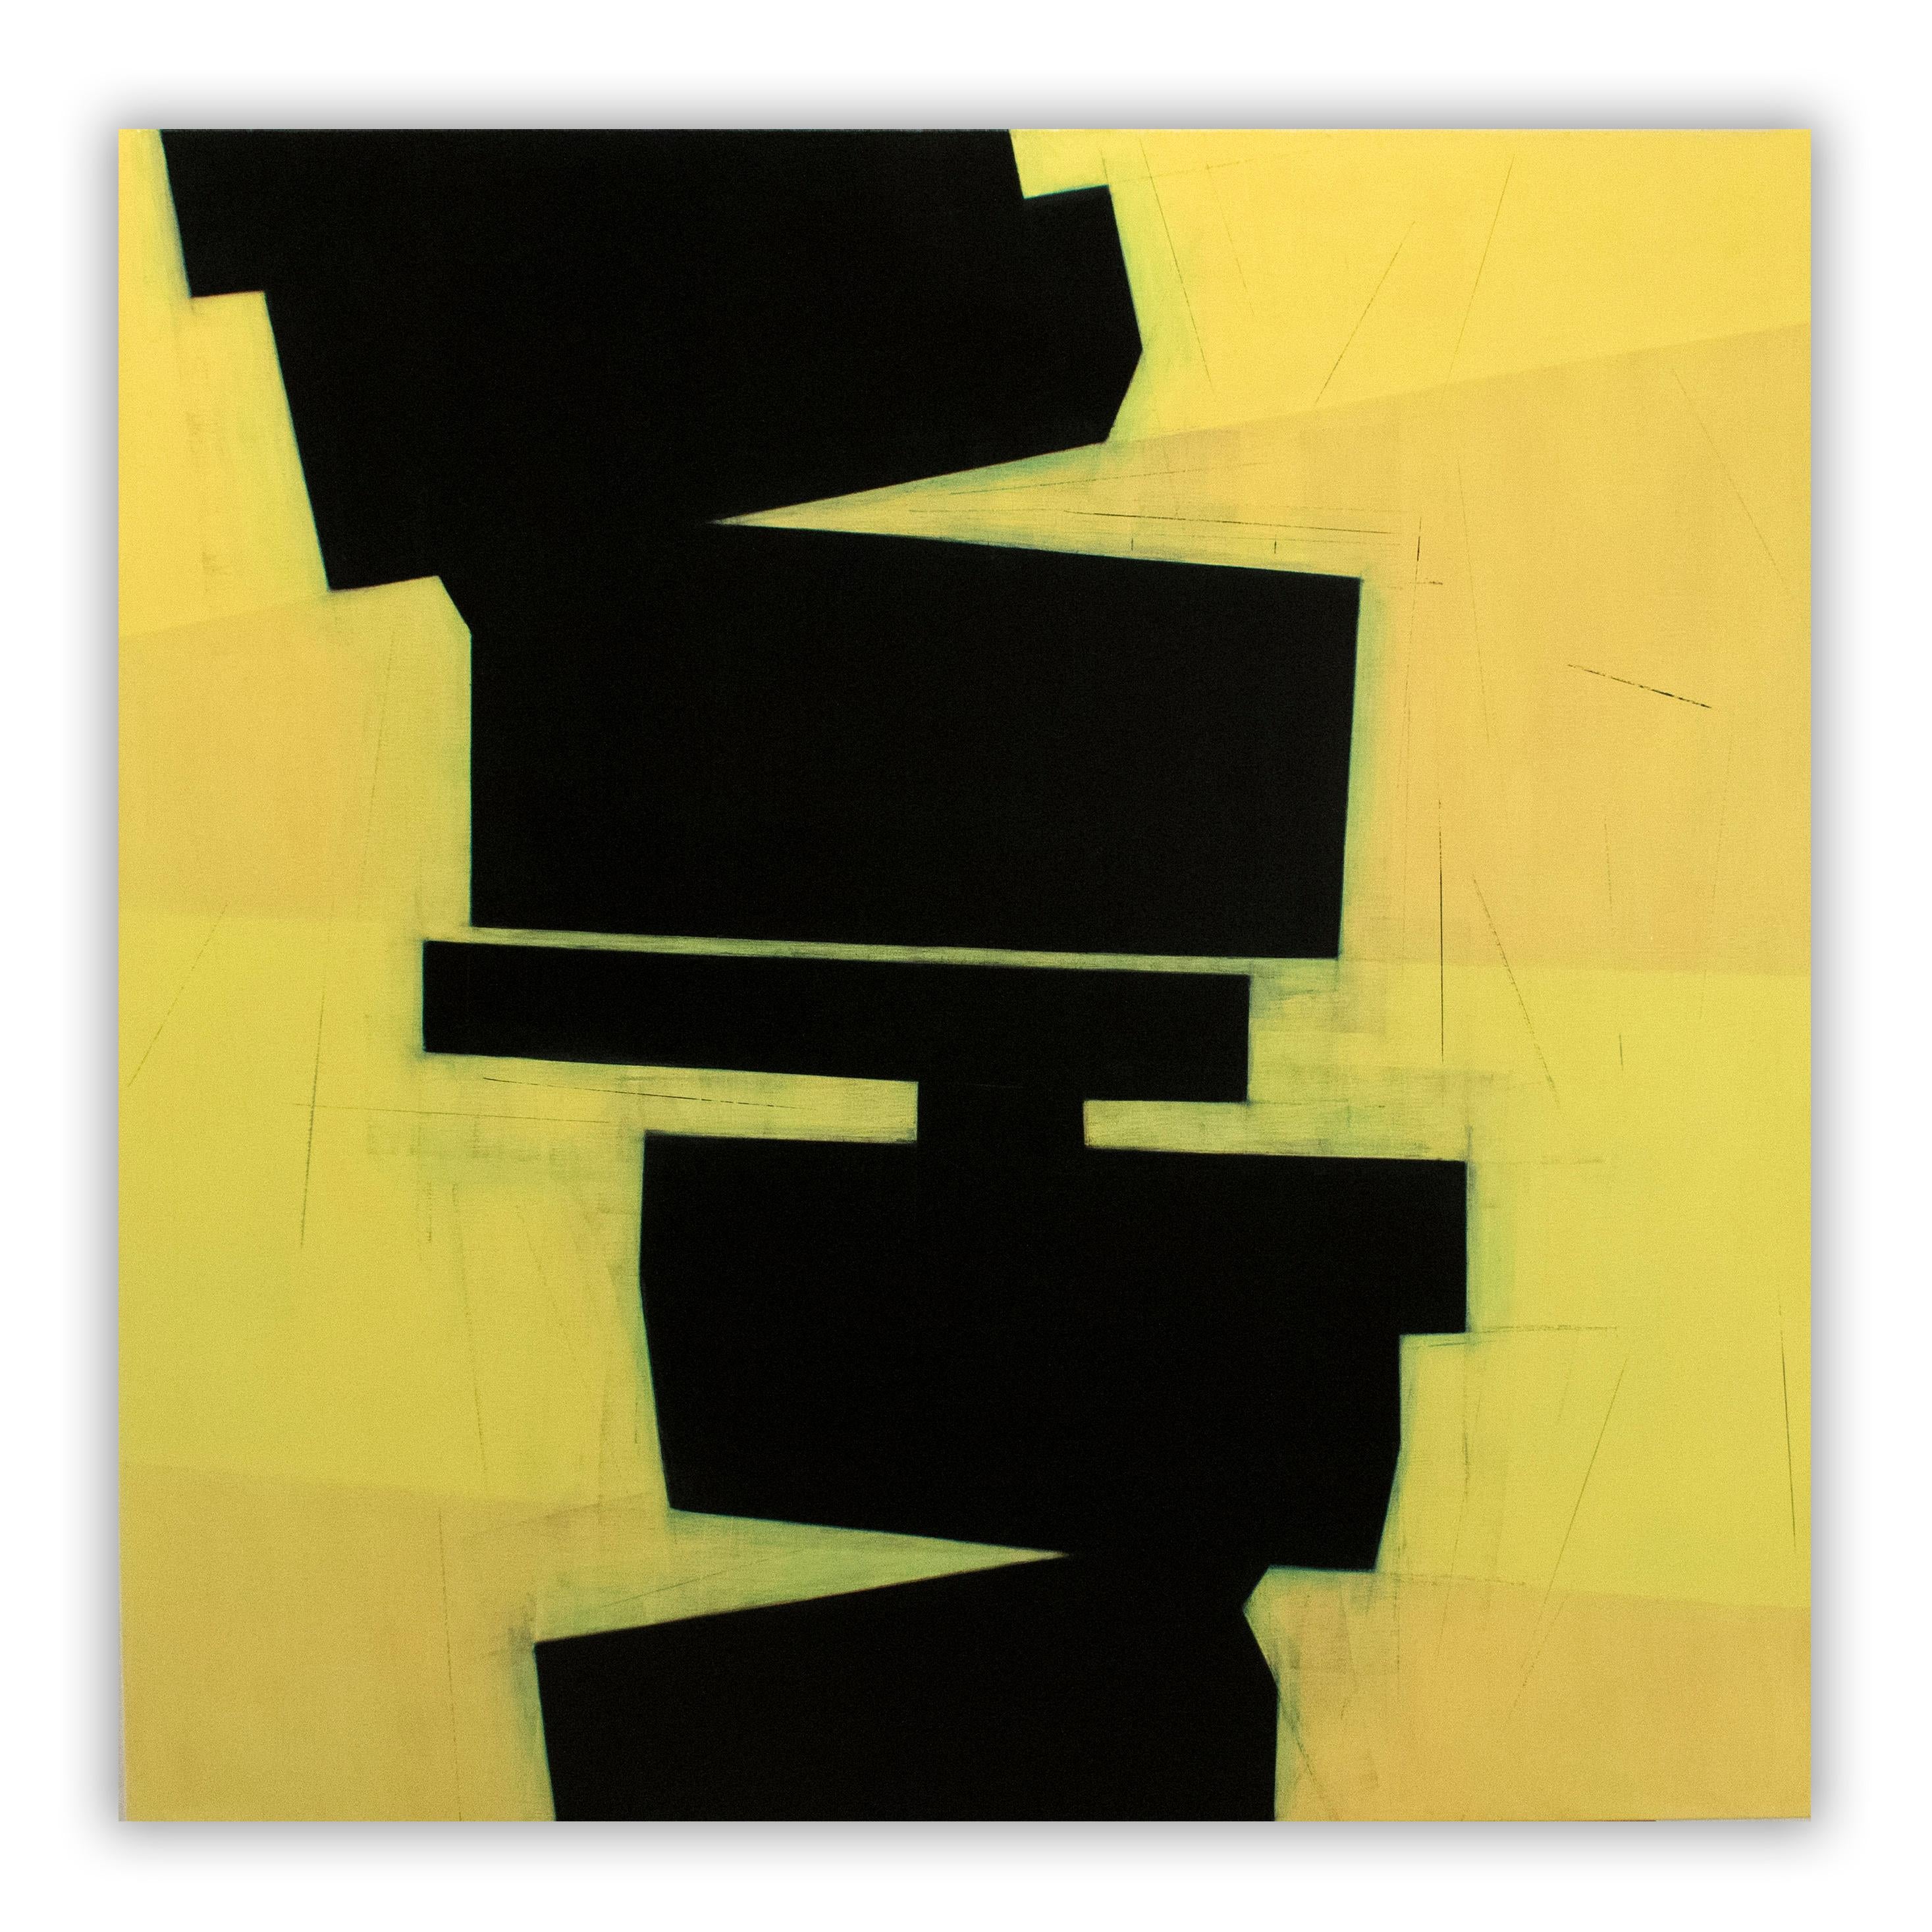 Dys_Equilibria E1 (Abstract Painting)

Oil on canvas - Unframed

The philosophically conceptual abstract artist Steve Baris explores the spatial and temporal inconsistencies of our rapidly developing technological age. He lives and works in